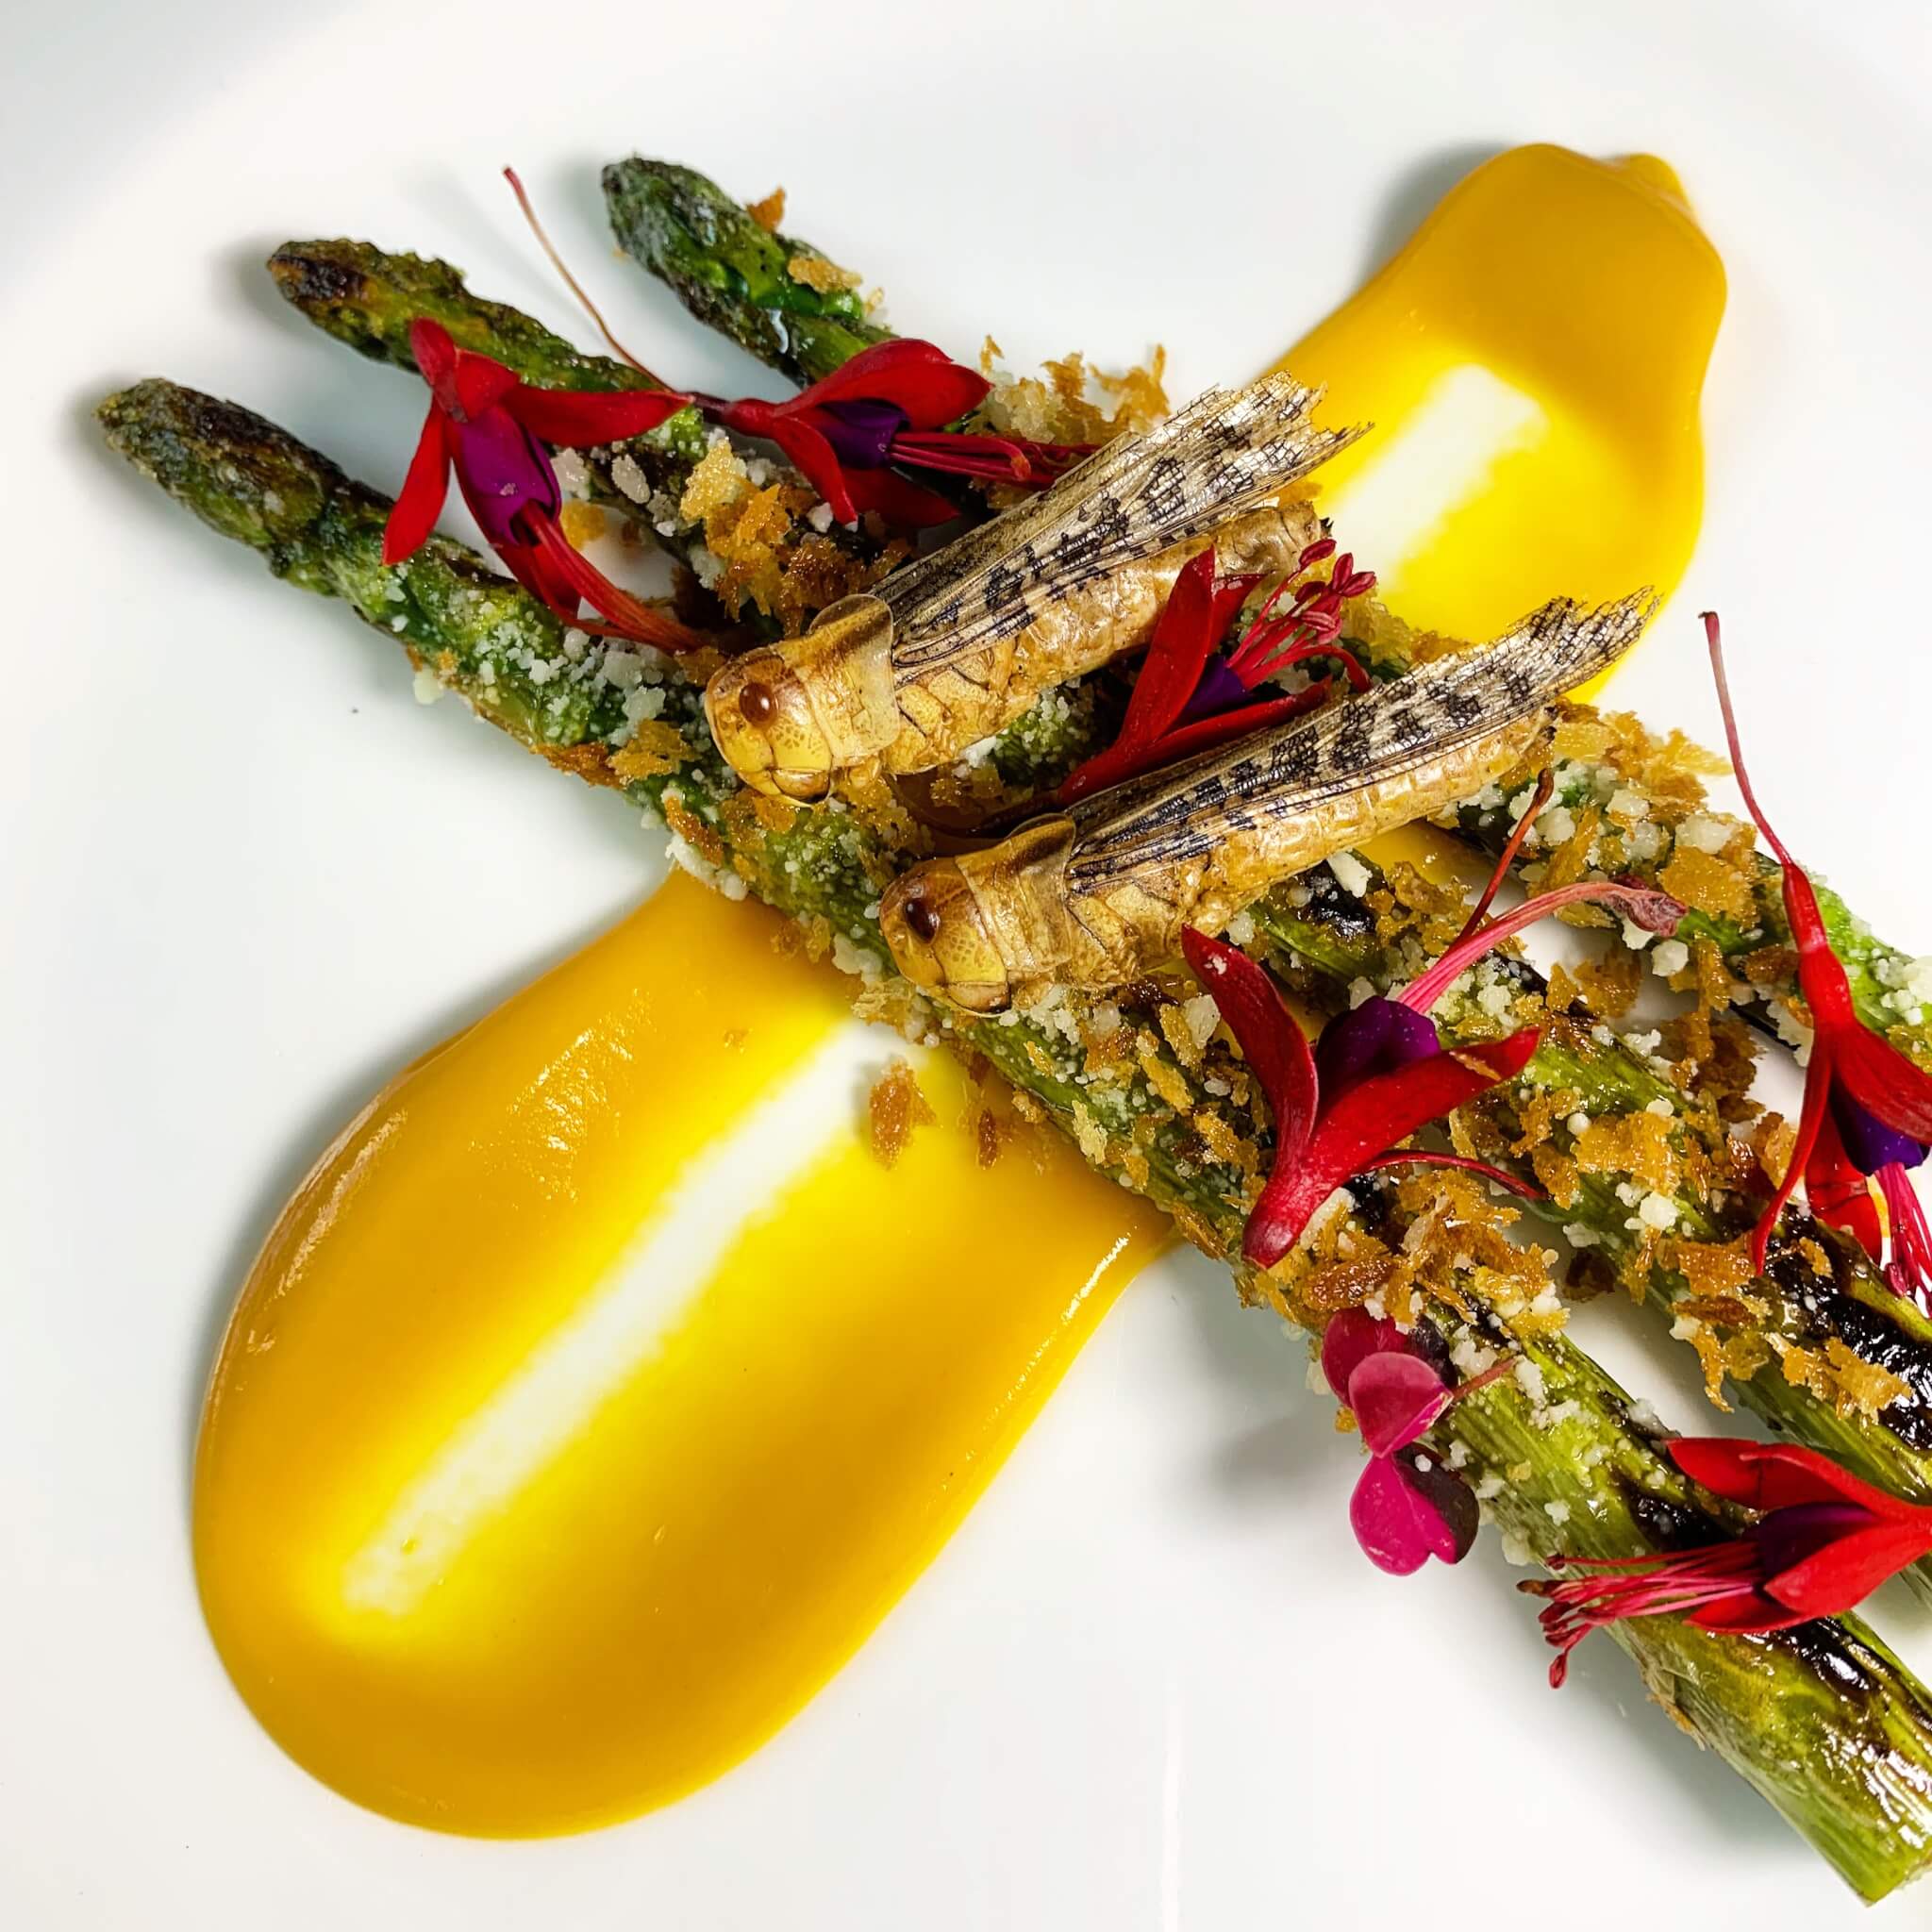 This locus asparagus is one of the many dishes prepared by Yoon with edible insects. 